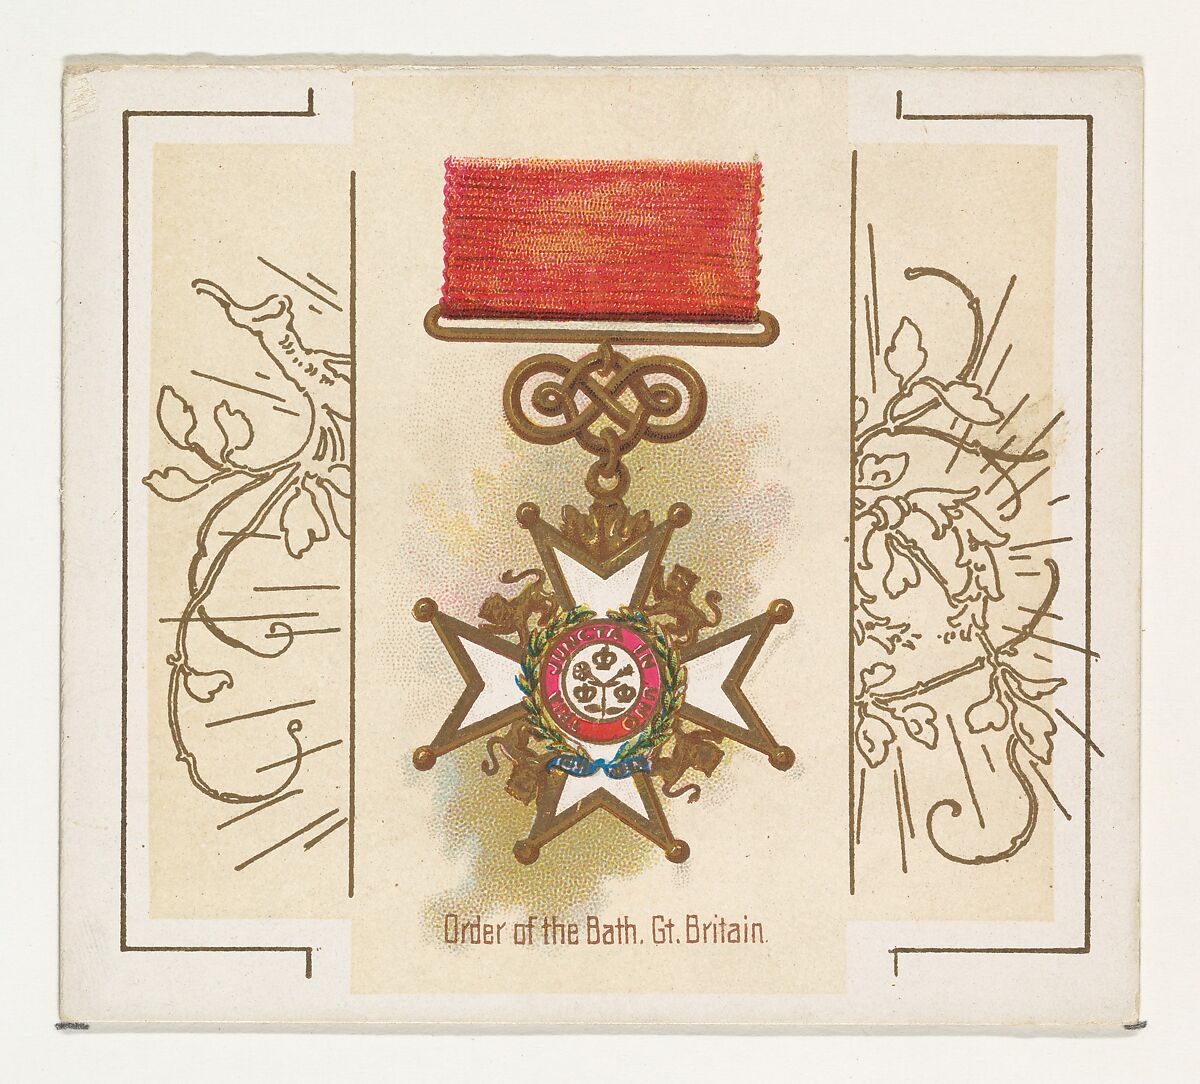 Order of the Bath, Great Britain, from the World's Decorations series (N44) for Allen & Ginter Cigarettes, Issued by Allen &amp; Ginter (American, Richmond, Virginia), Commercial color lithograph 